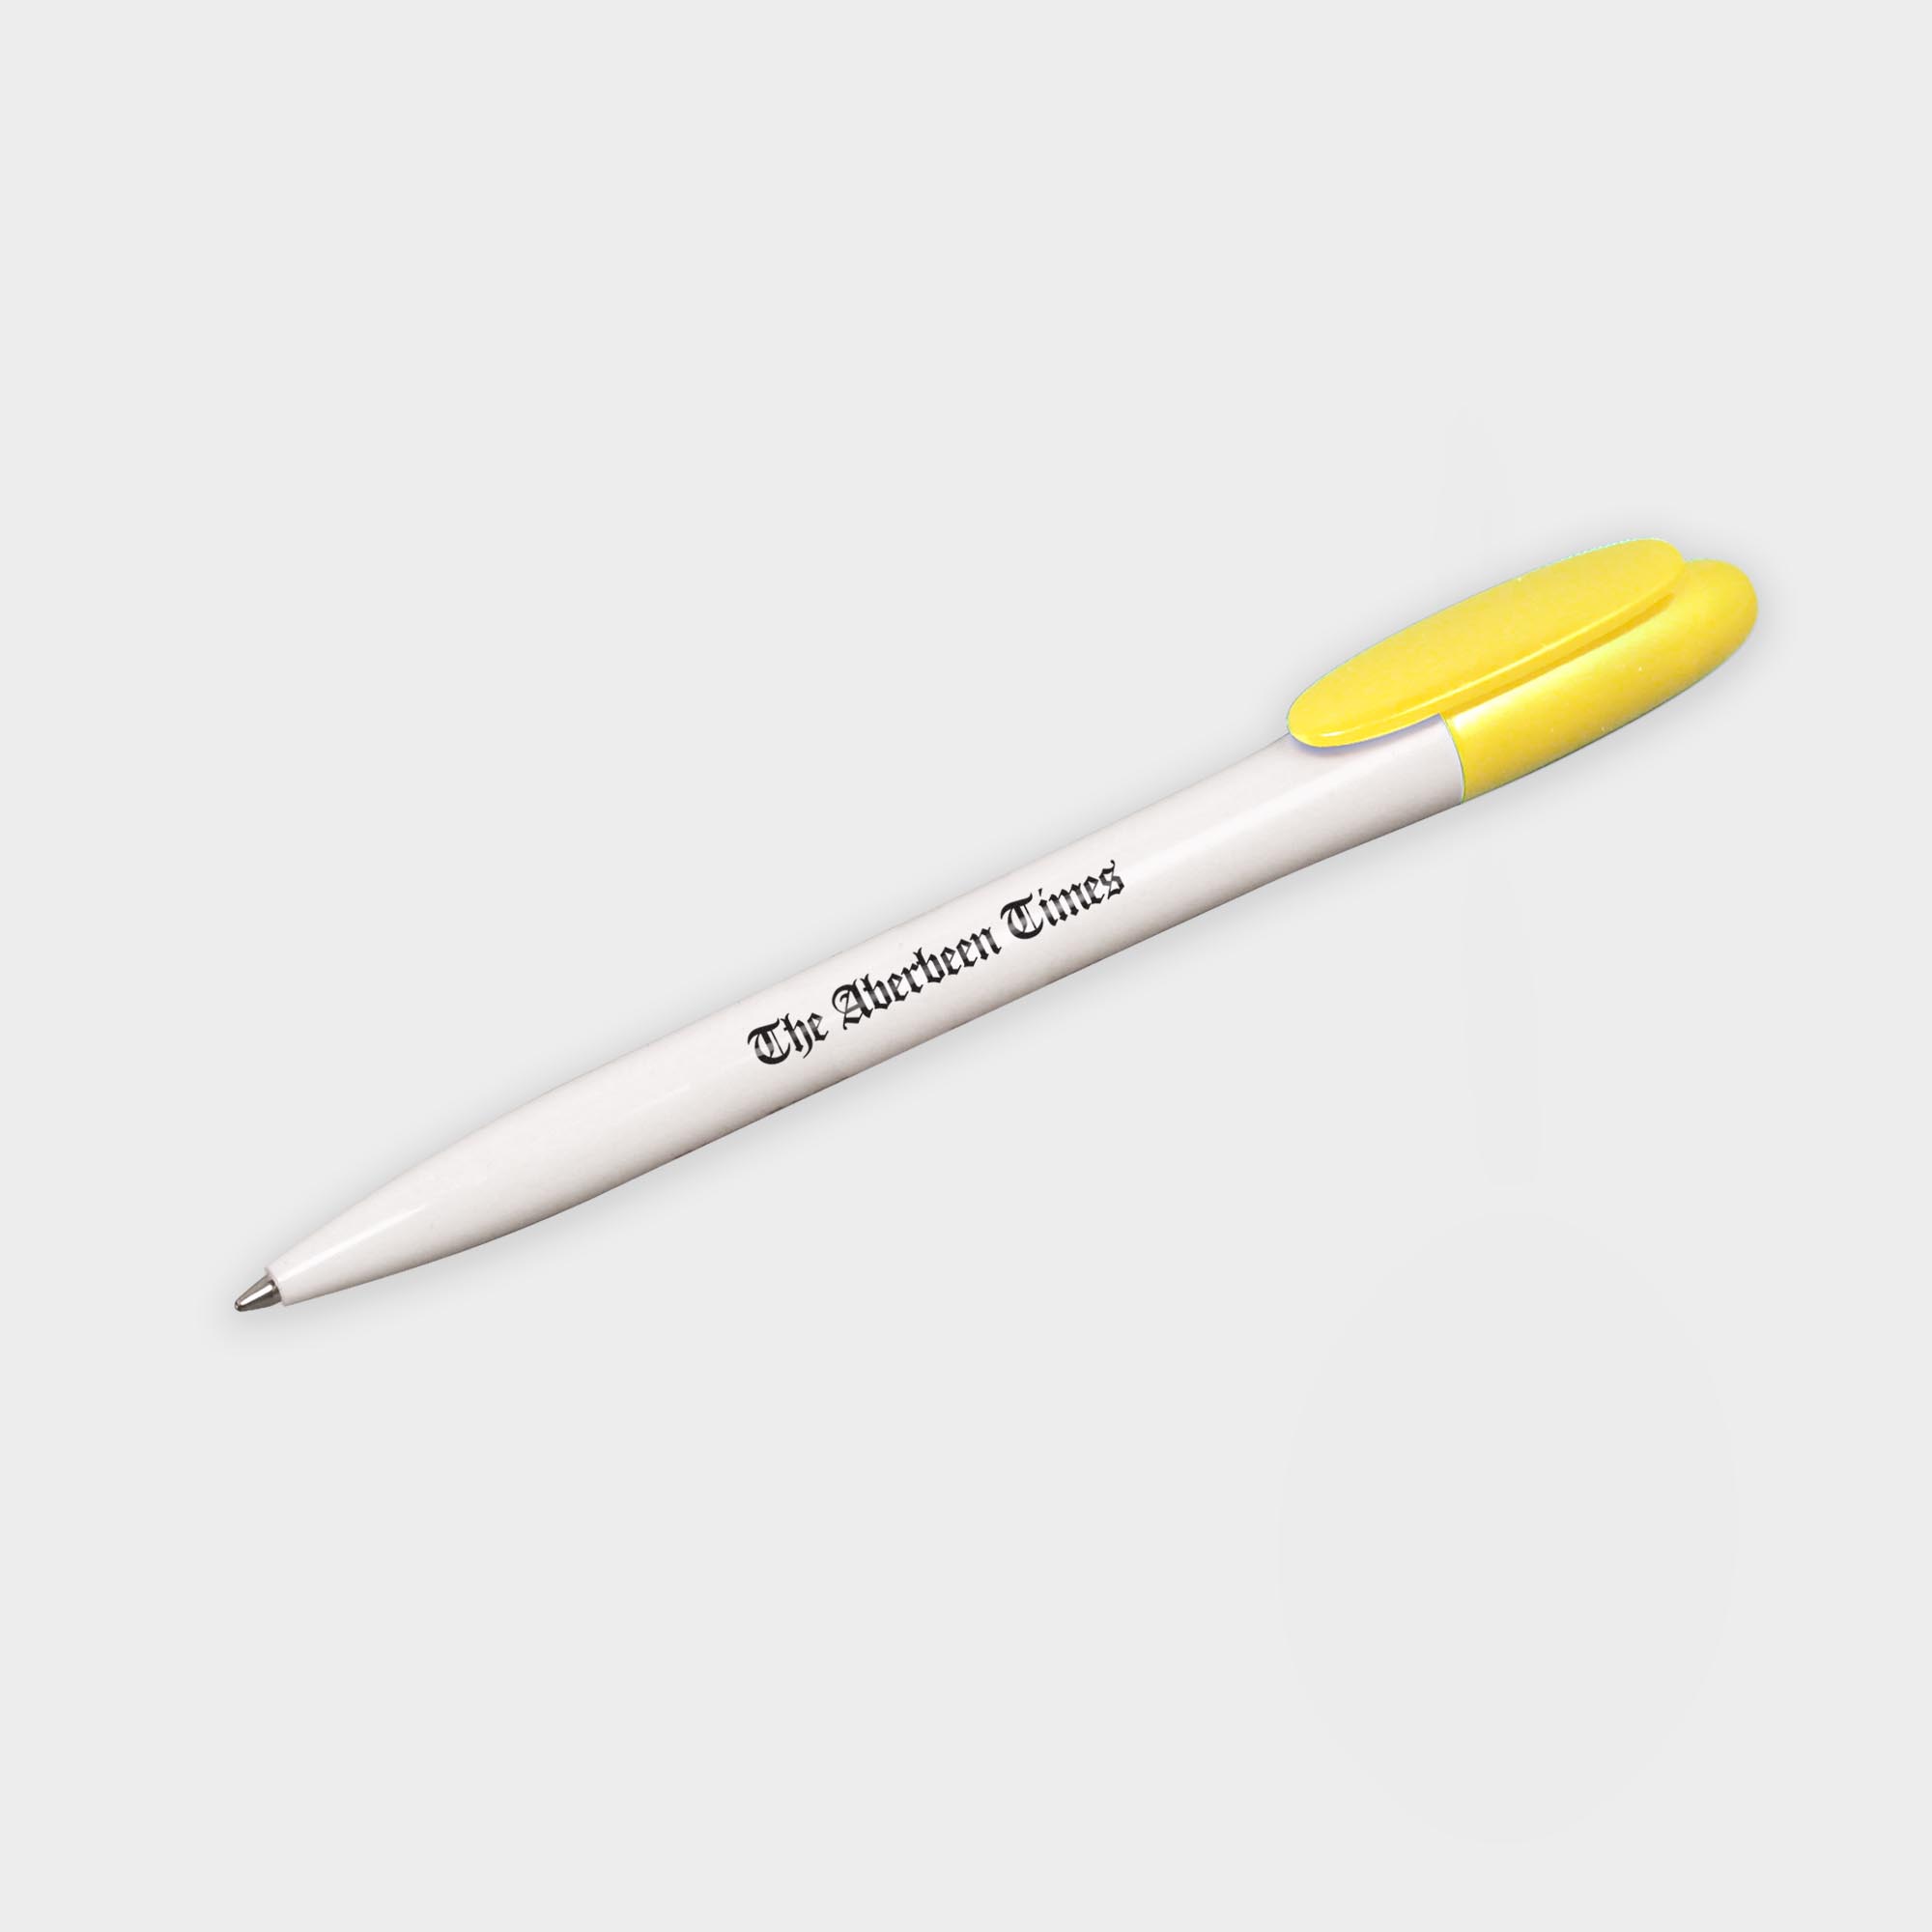 The Green & Good Realta ballpen. It is made in the EU from recycled plastic. Available in a variety of colours with a twist action mechanism. Comes with black ink as standard. One of our bestsellers. White / Yellow